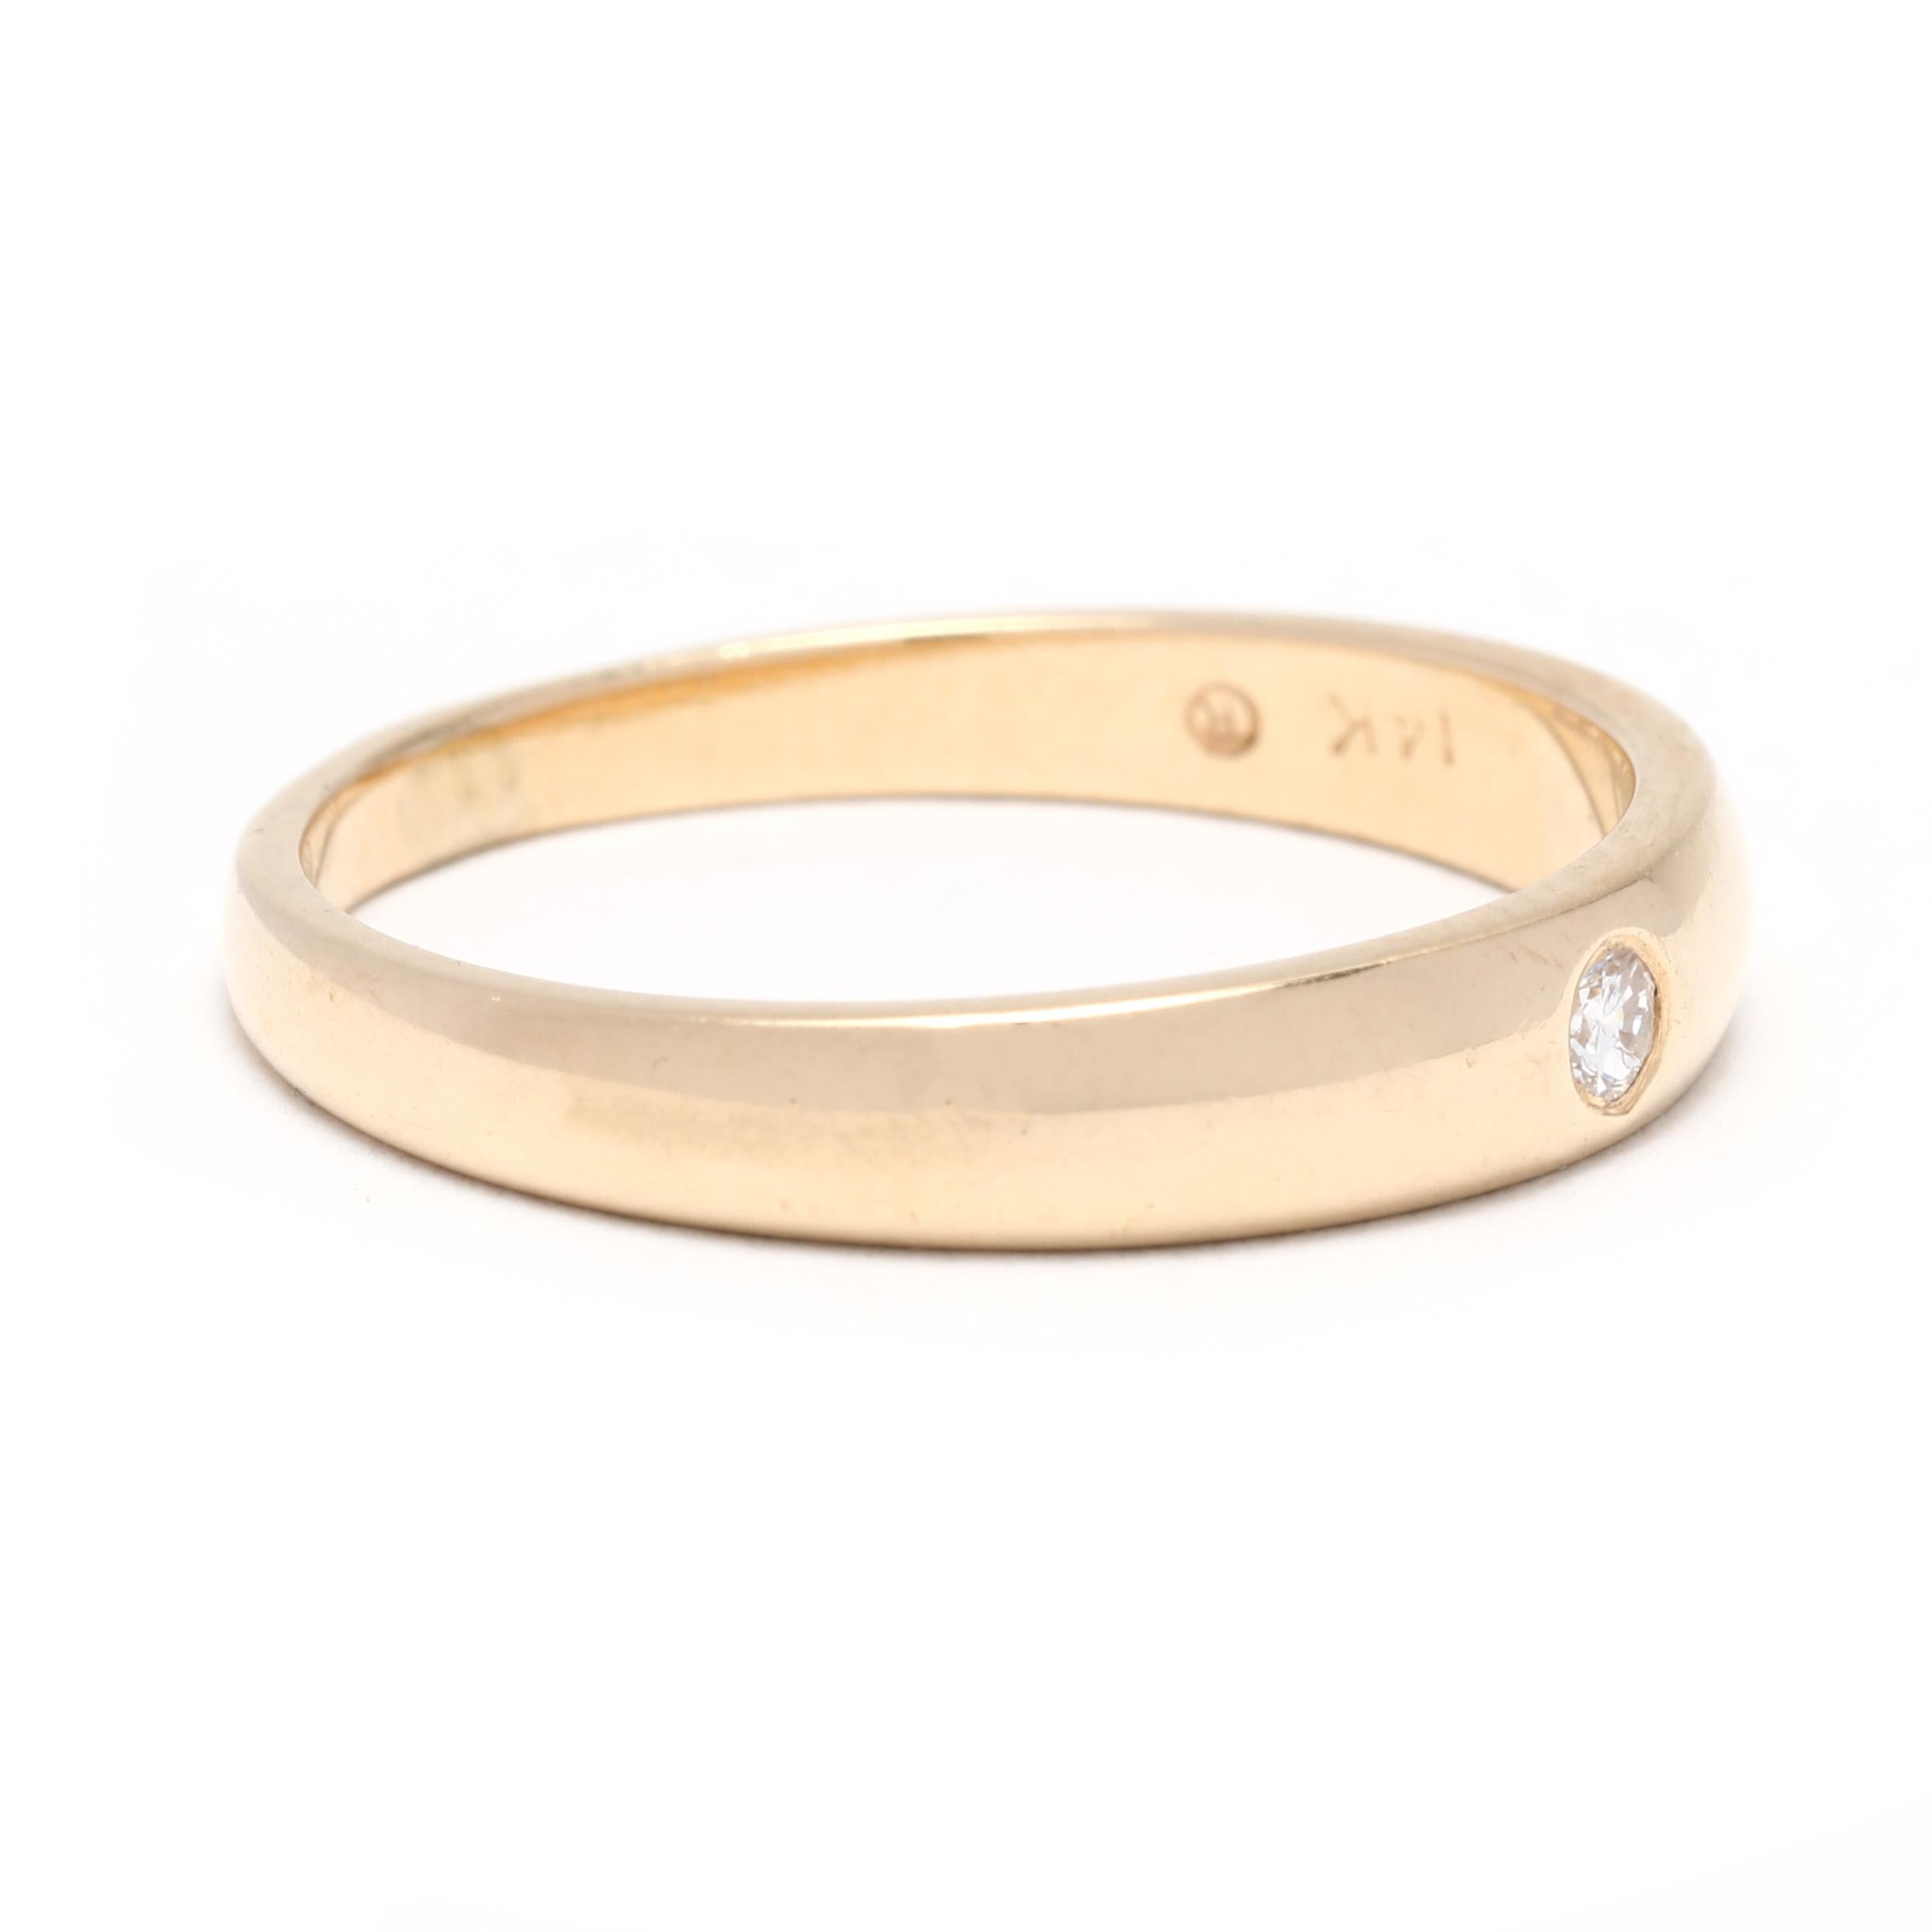 A vintage 14 karat yellow gold thin diamond stackable band ring. This stackable wedding band features a tapered, polished design with a flush set round brilliant cut diamond weighing approximately .03 carat.

Stones:
- diamond, 1 stone
- round